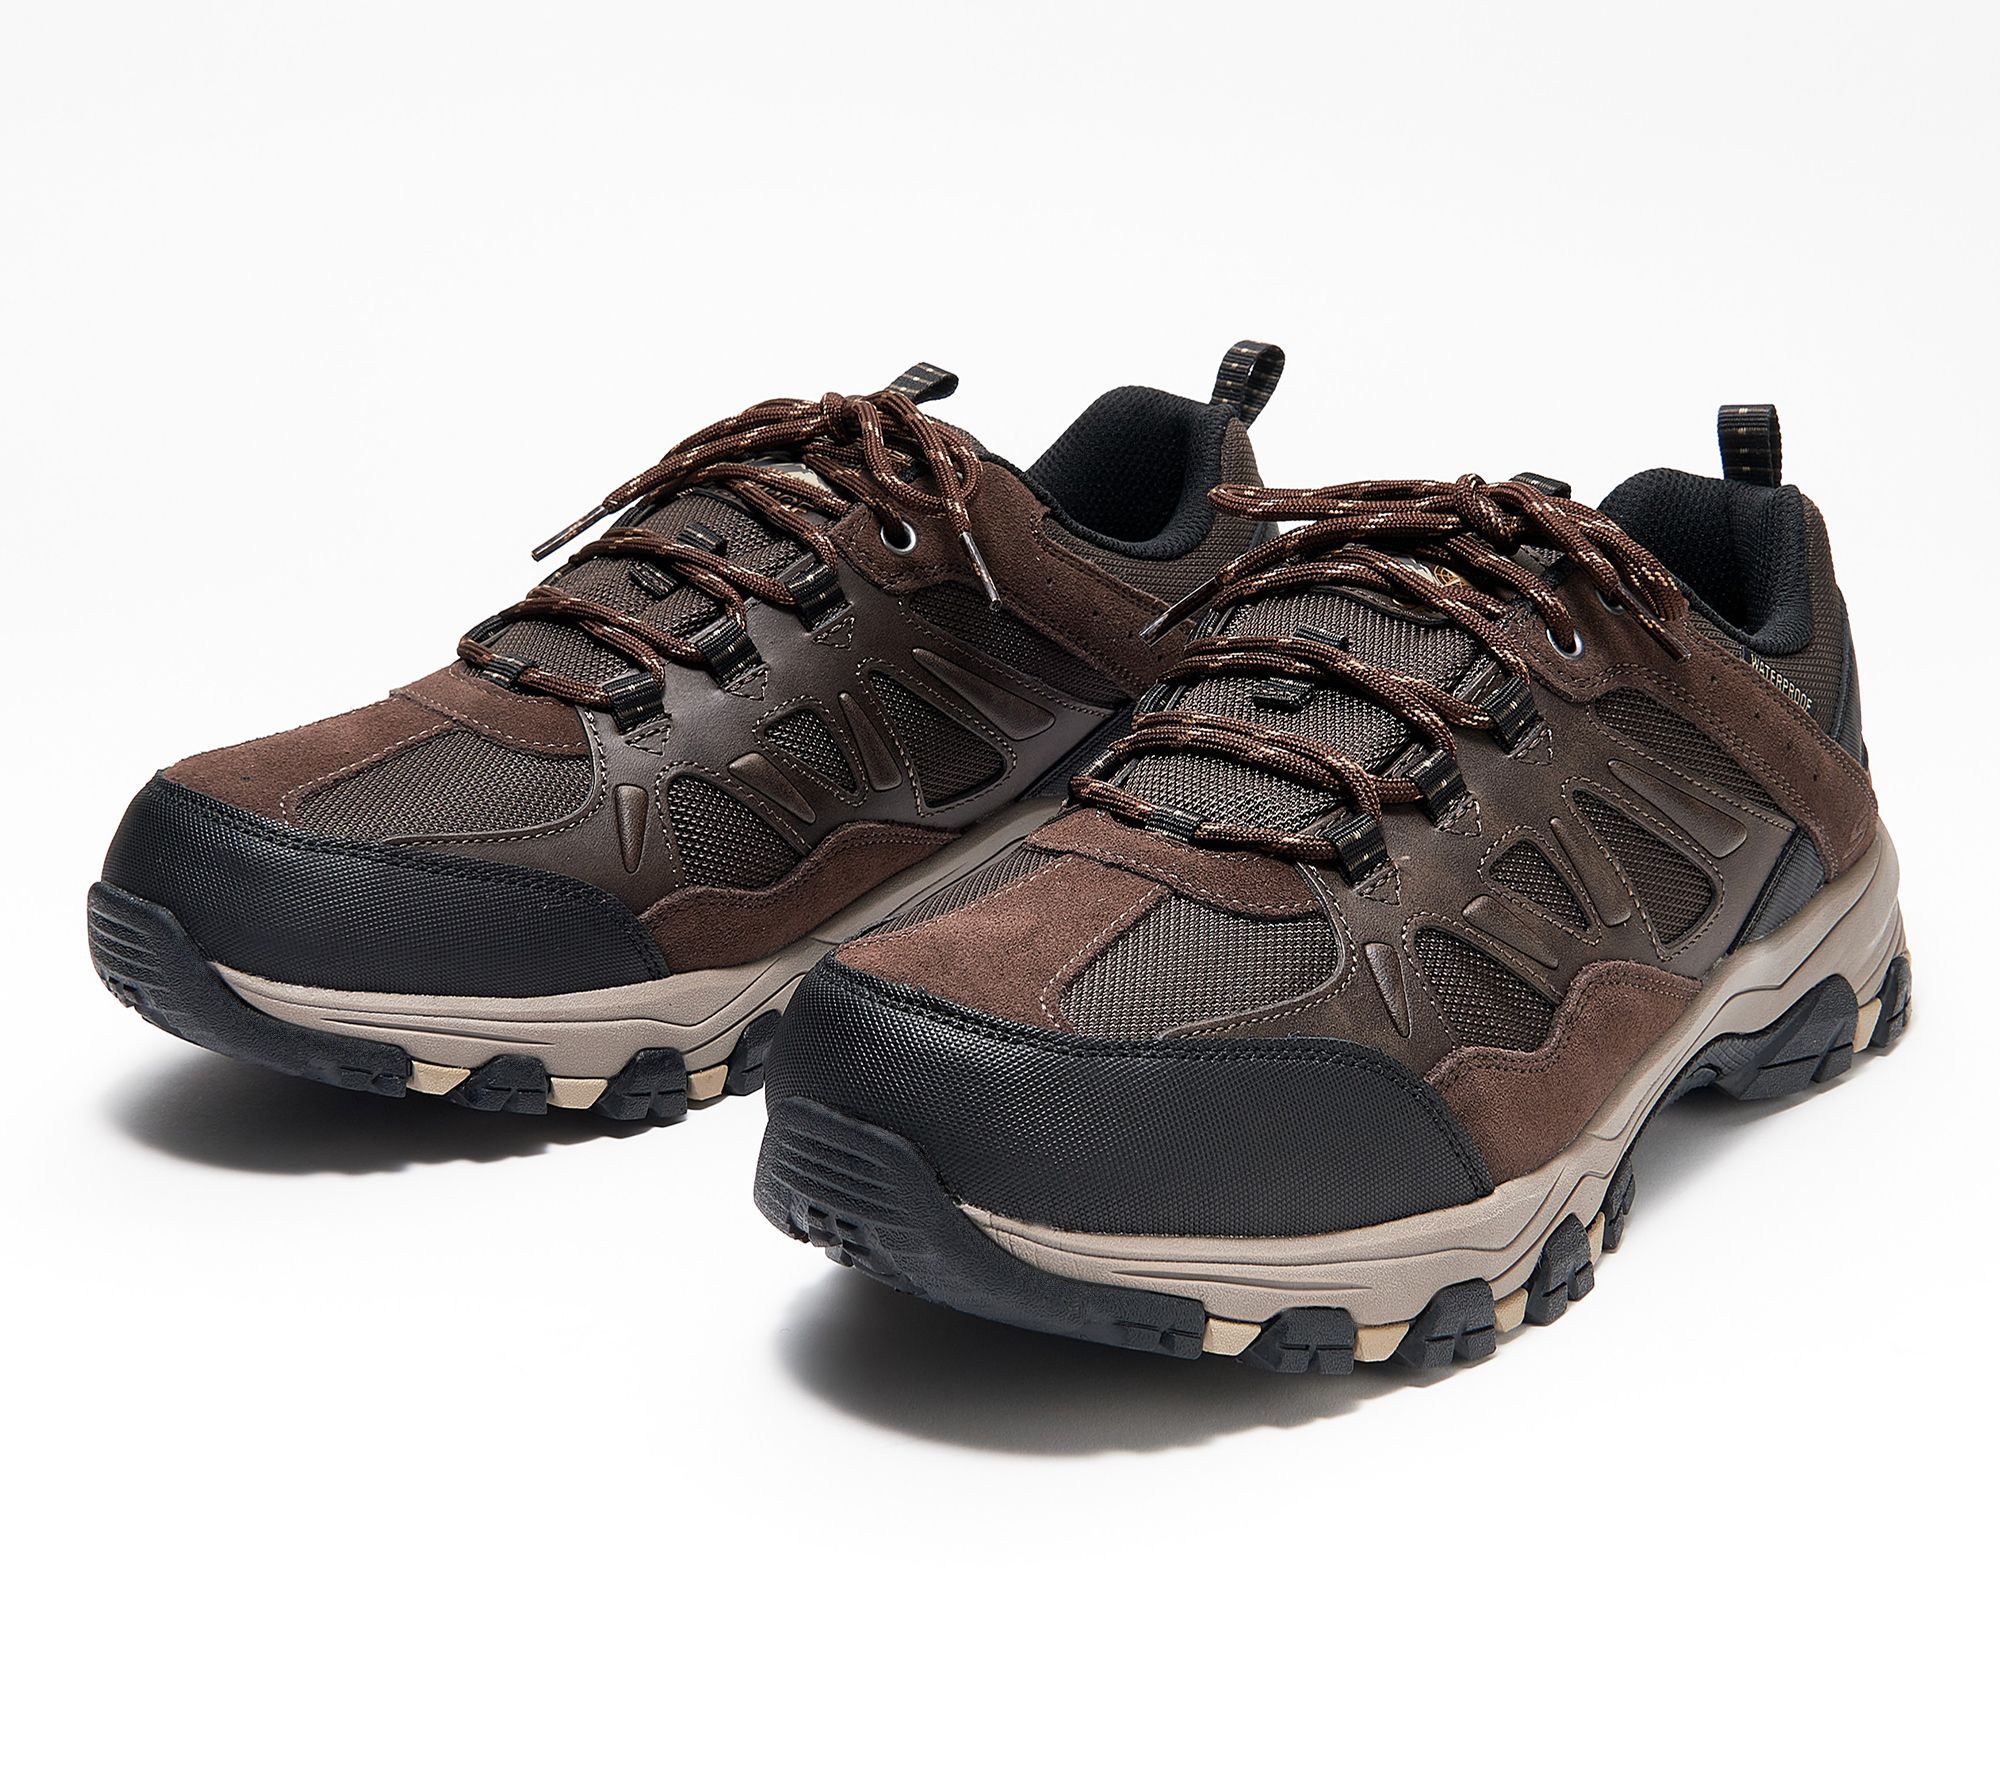 As Is" Skechers Men's Relaxed Fit Sneakers - QVC.com